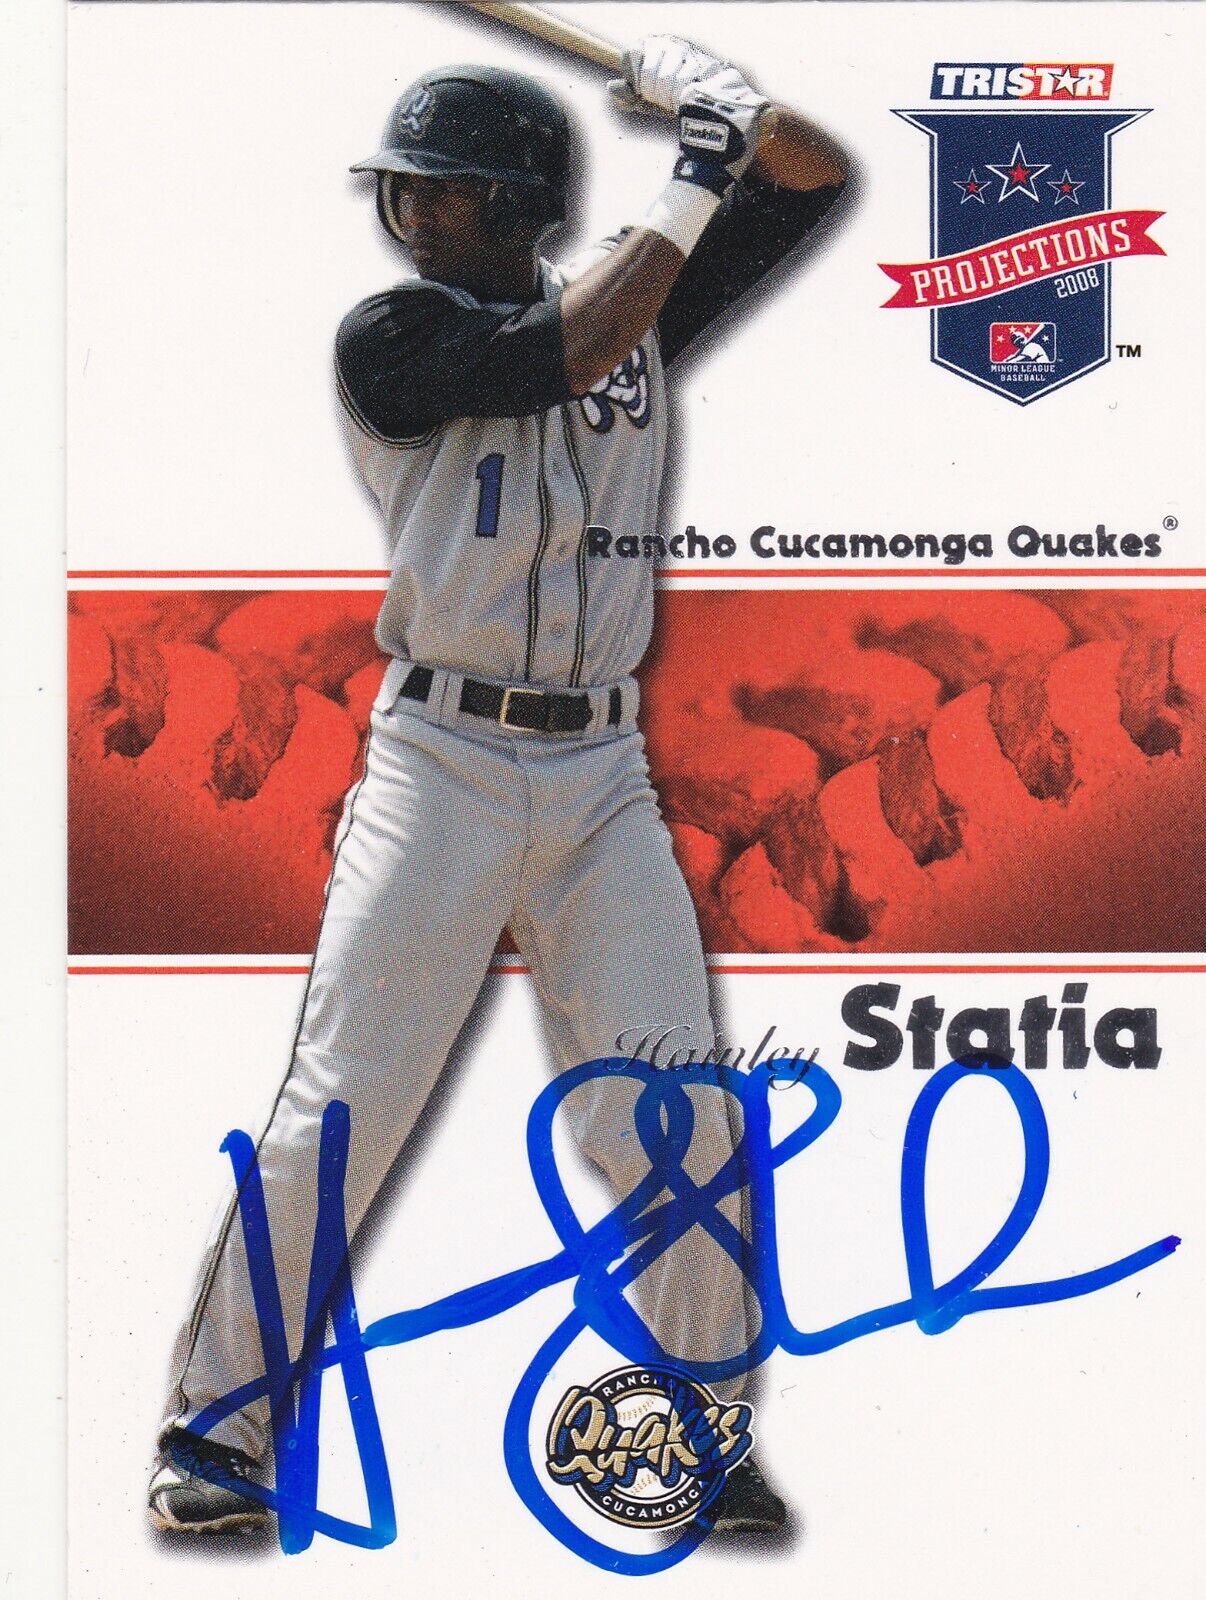 HAINLEY STATIA RANCHO CUCAMONGA QUAKES SIGNED 2008 TRISTAR PROJECTIONS CARD